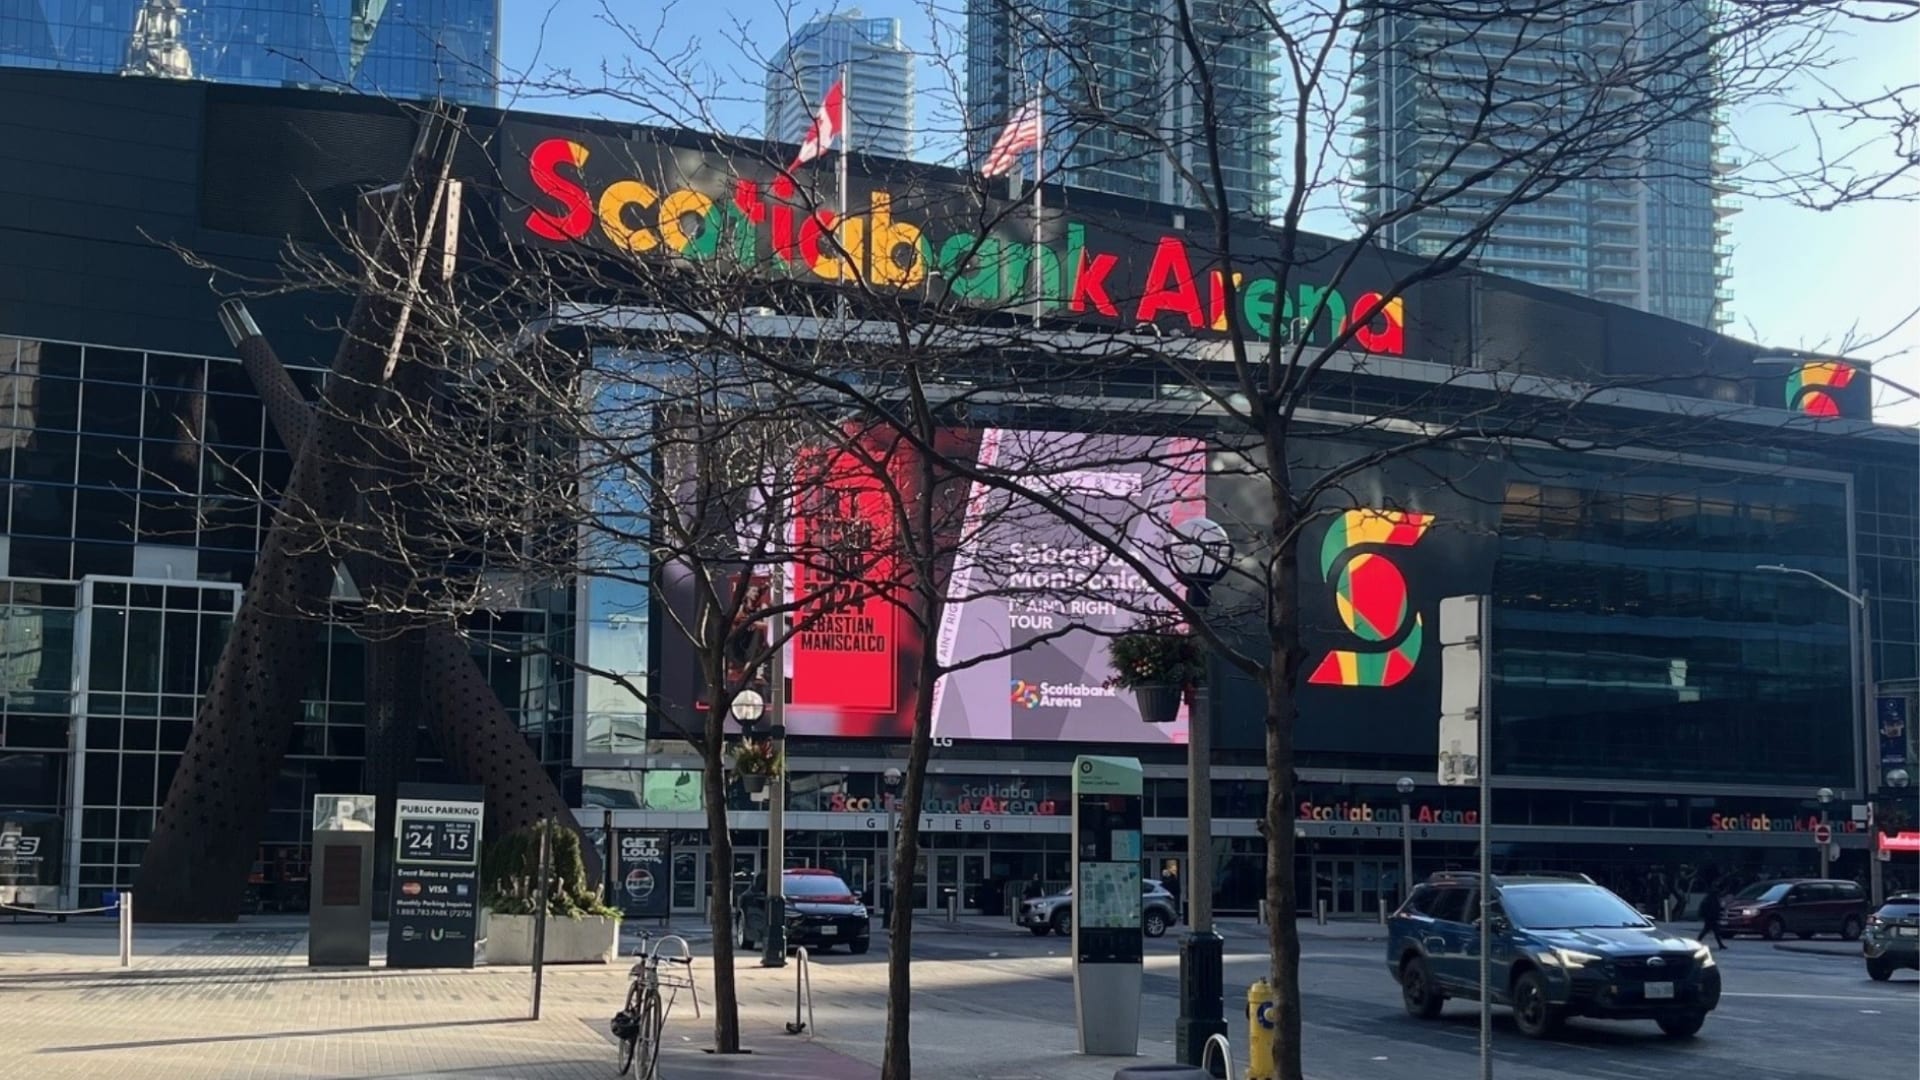 Gate 6 entrance outside of the Scotiabank Arena